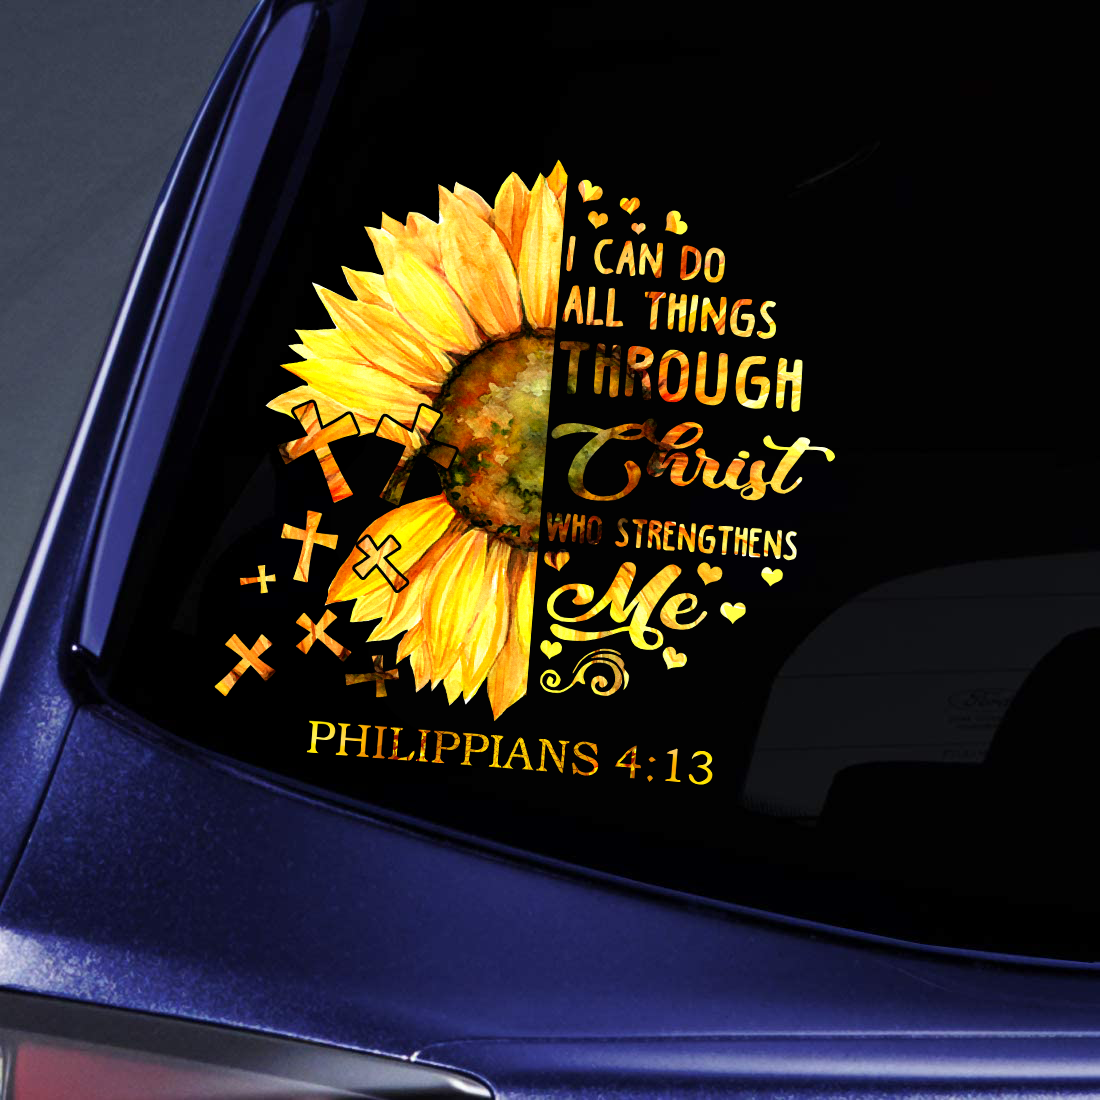 I Can Do All Things Through Christ Who Strengthens Me Philippians 4:13 Sticker Decal